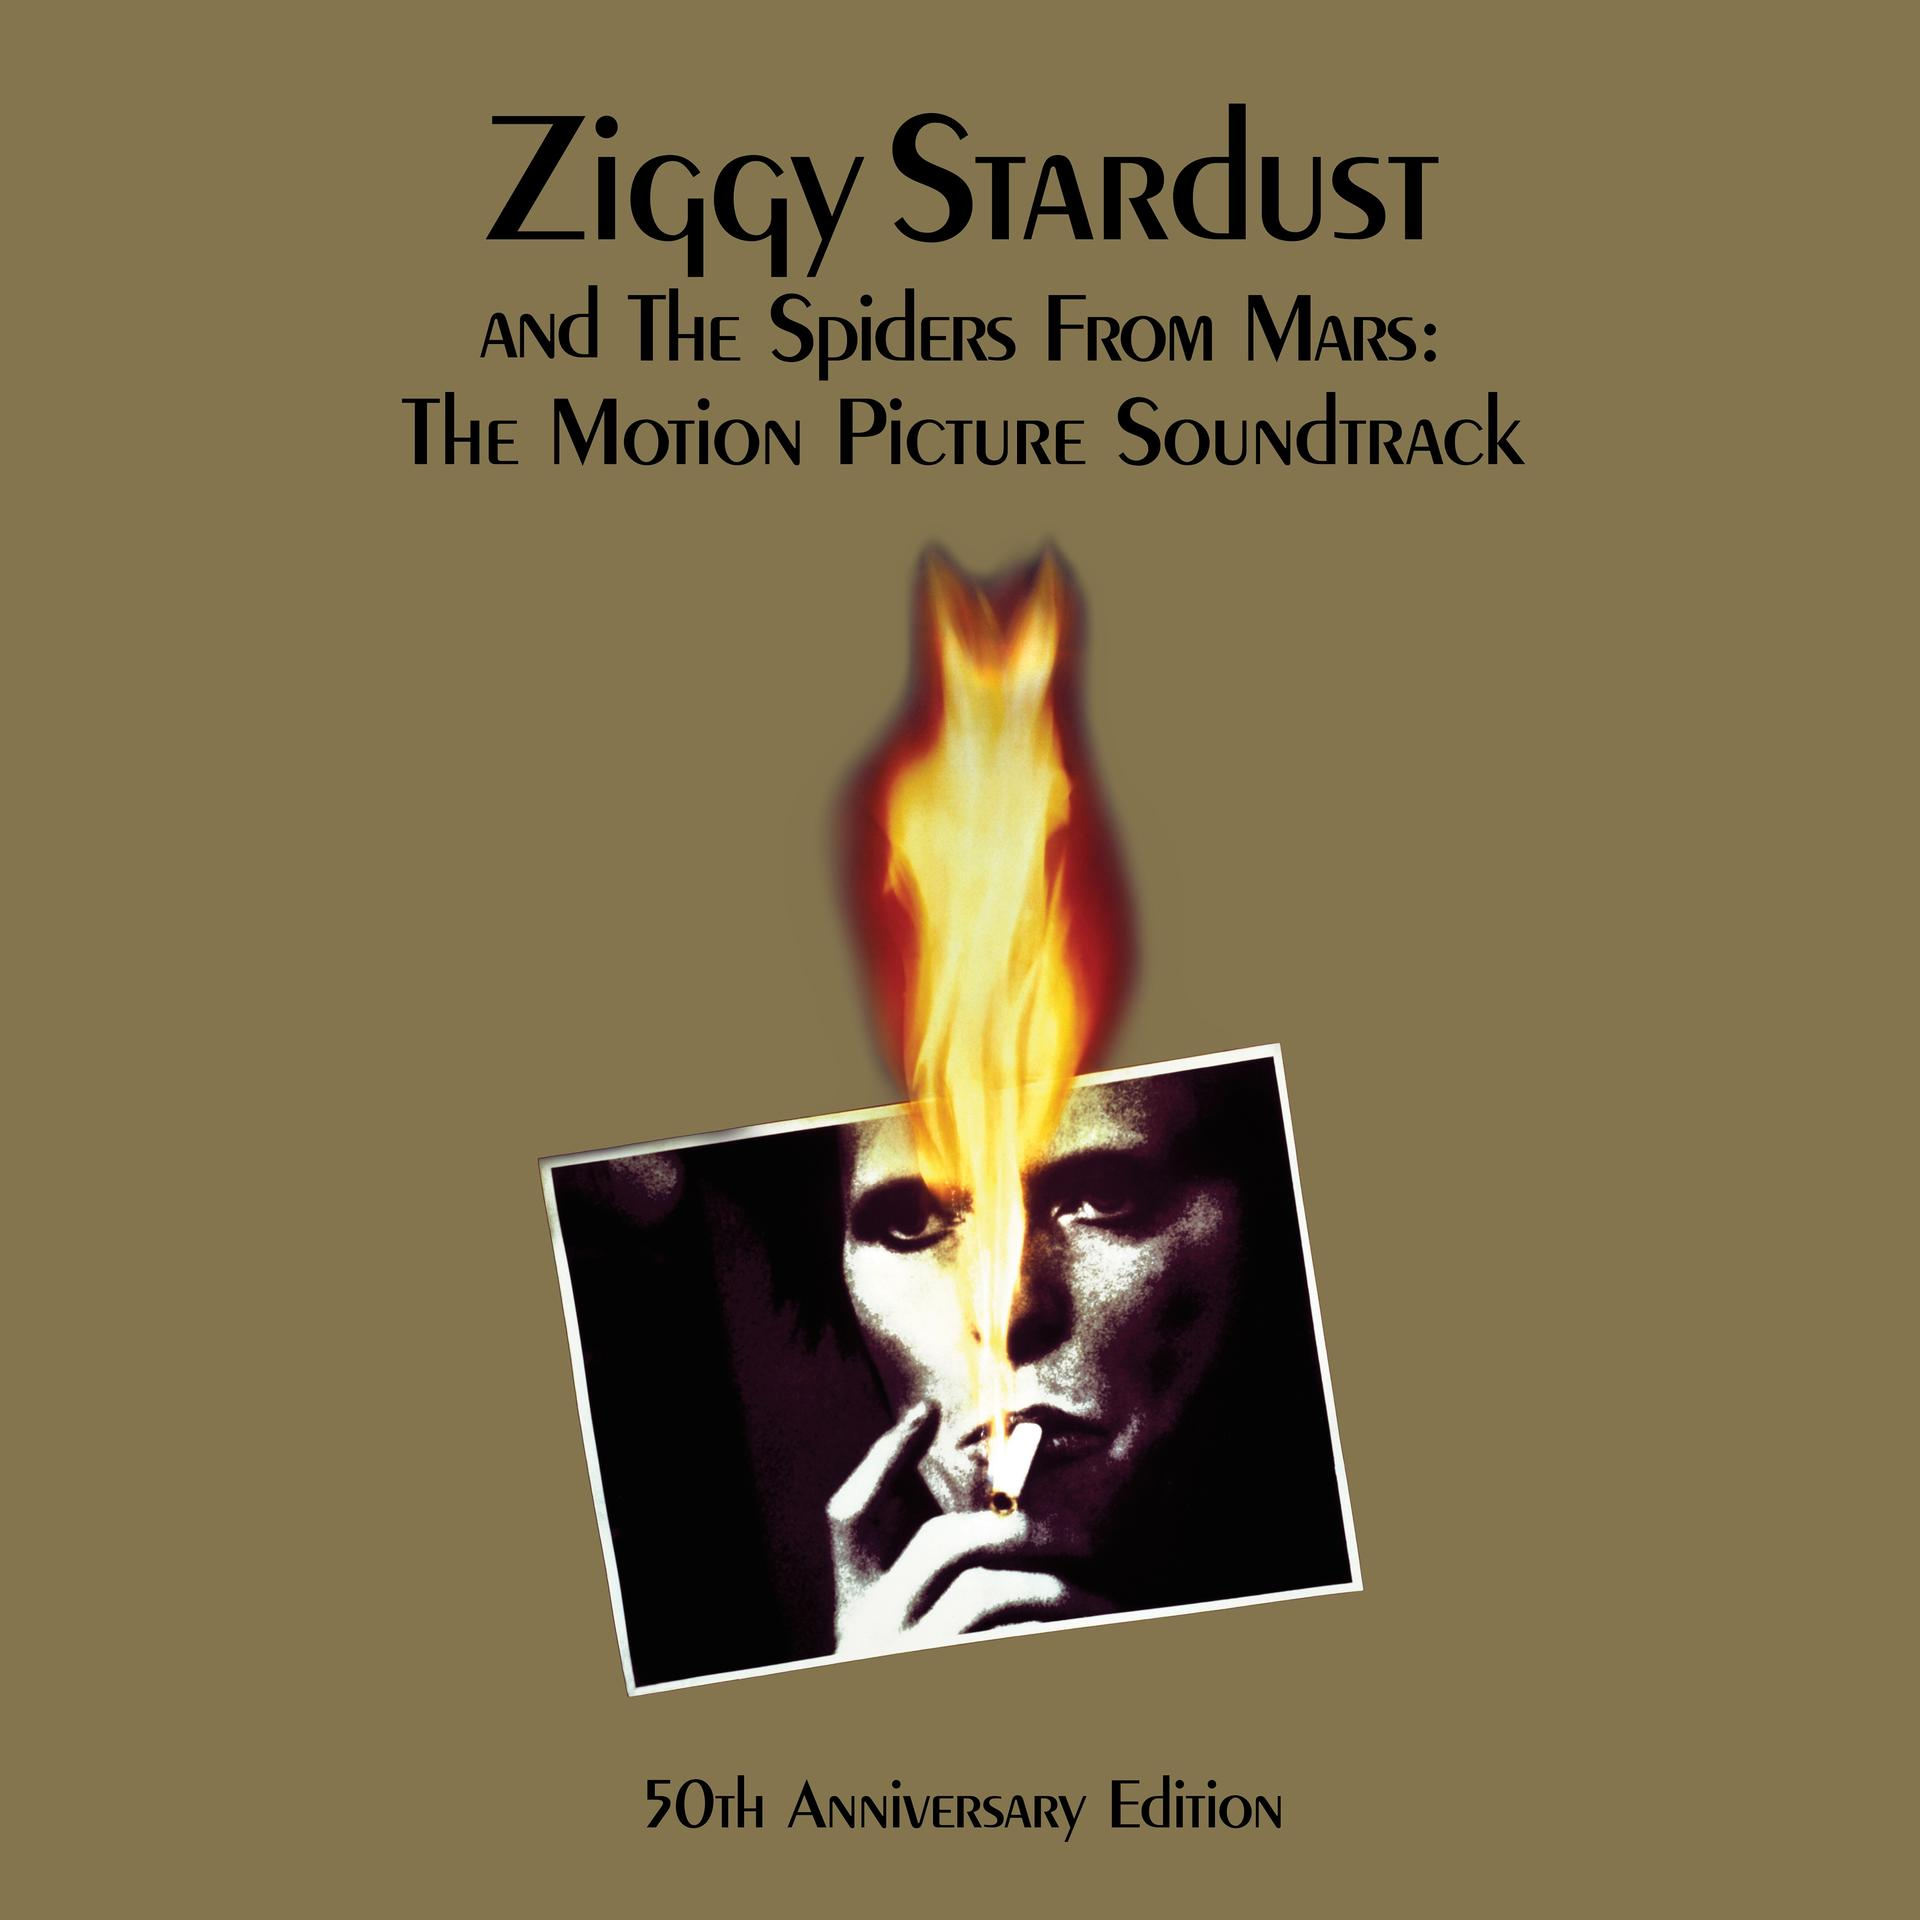 David Bowie From and Stardust Spiders - Mars: - Ziggy The (Vinyl)